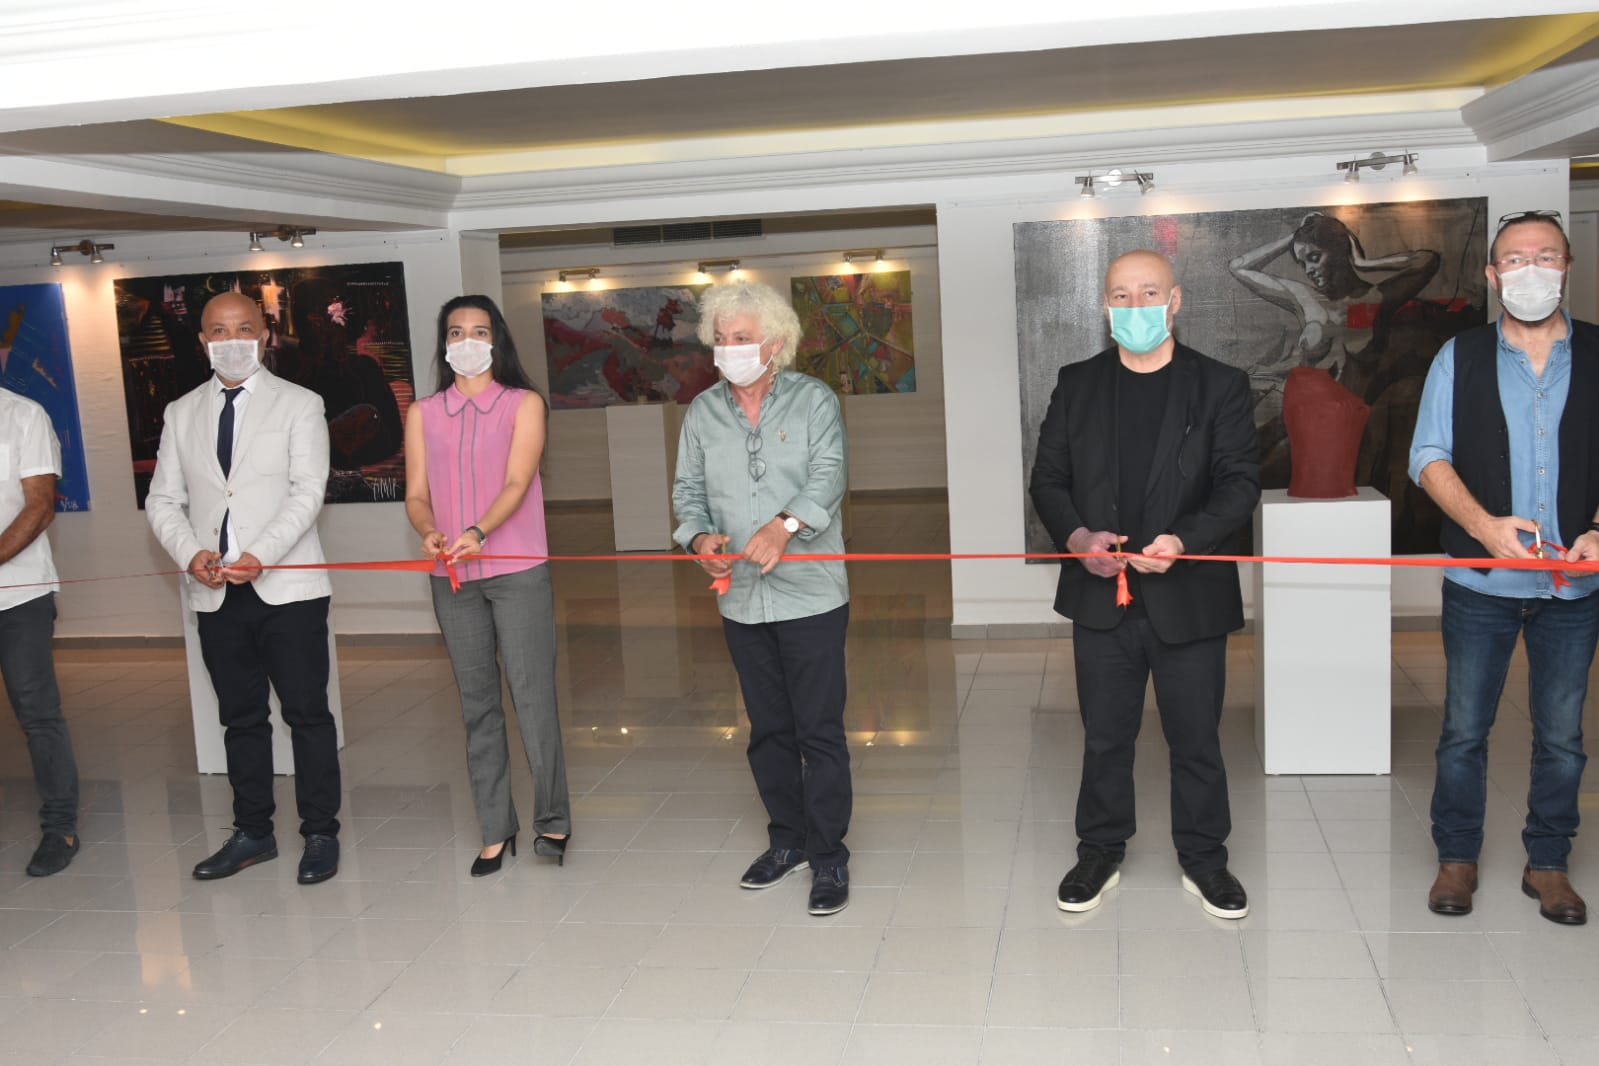 Consisting artworks created for the Cyprus Museum of Modern Arts by the lecturers and graduate students of the Faculty of Fine Arts and Design of Near East University, Fine Arts Exhibition 2020 was opened